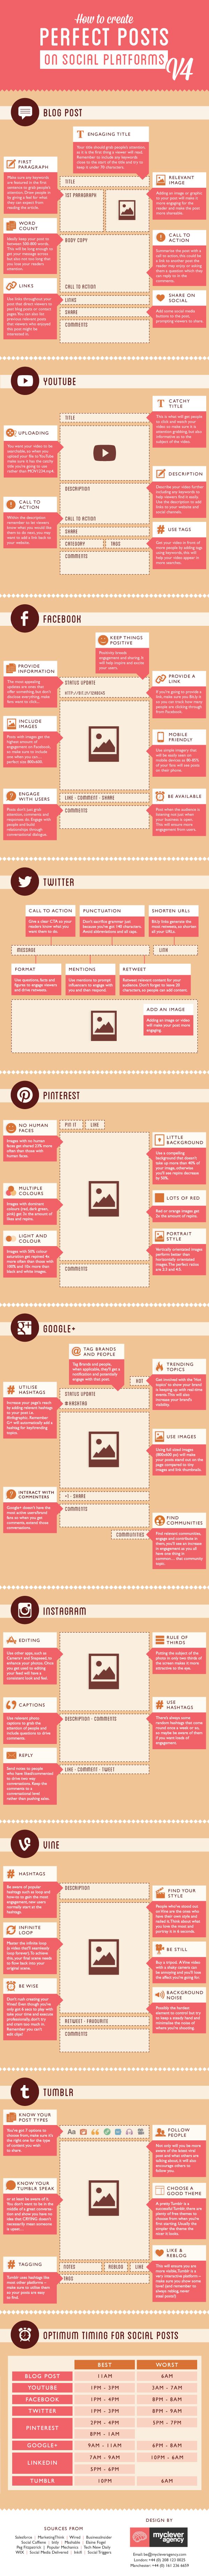 10 Best Time for Post on Social Media Infographic